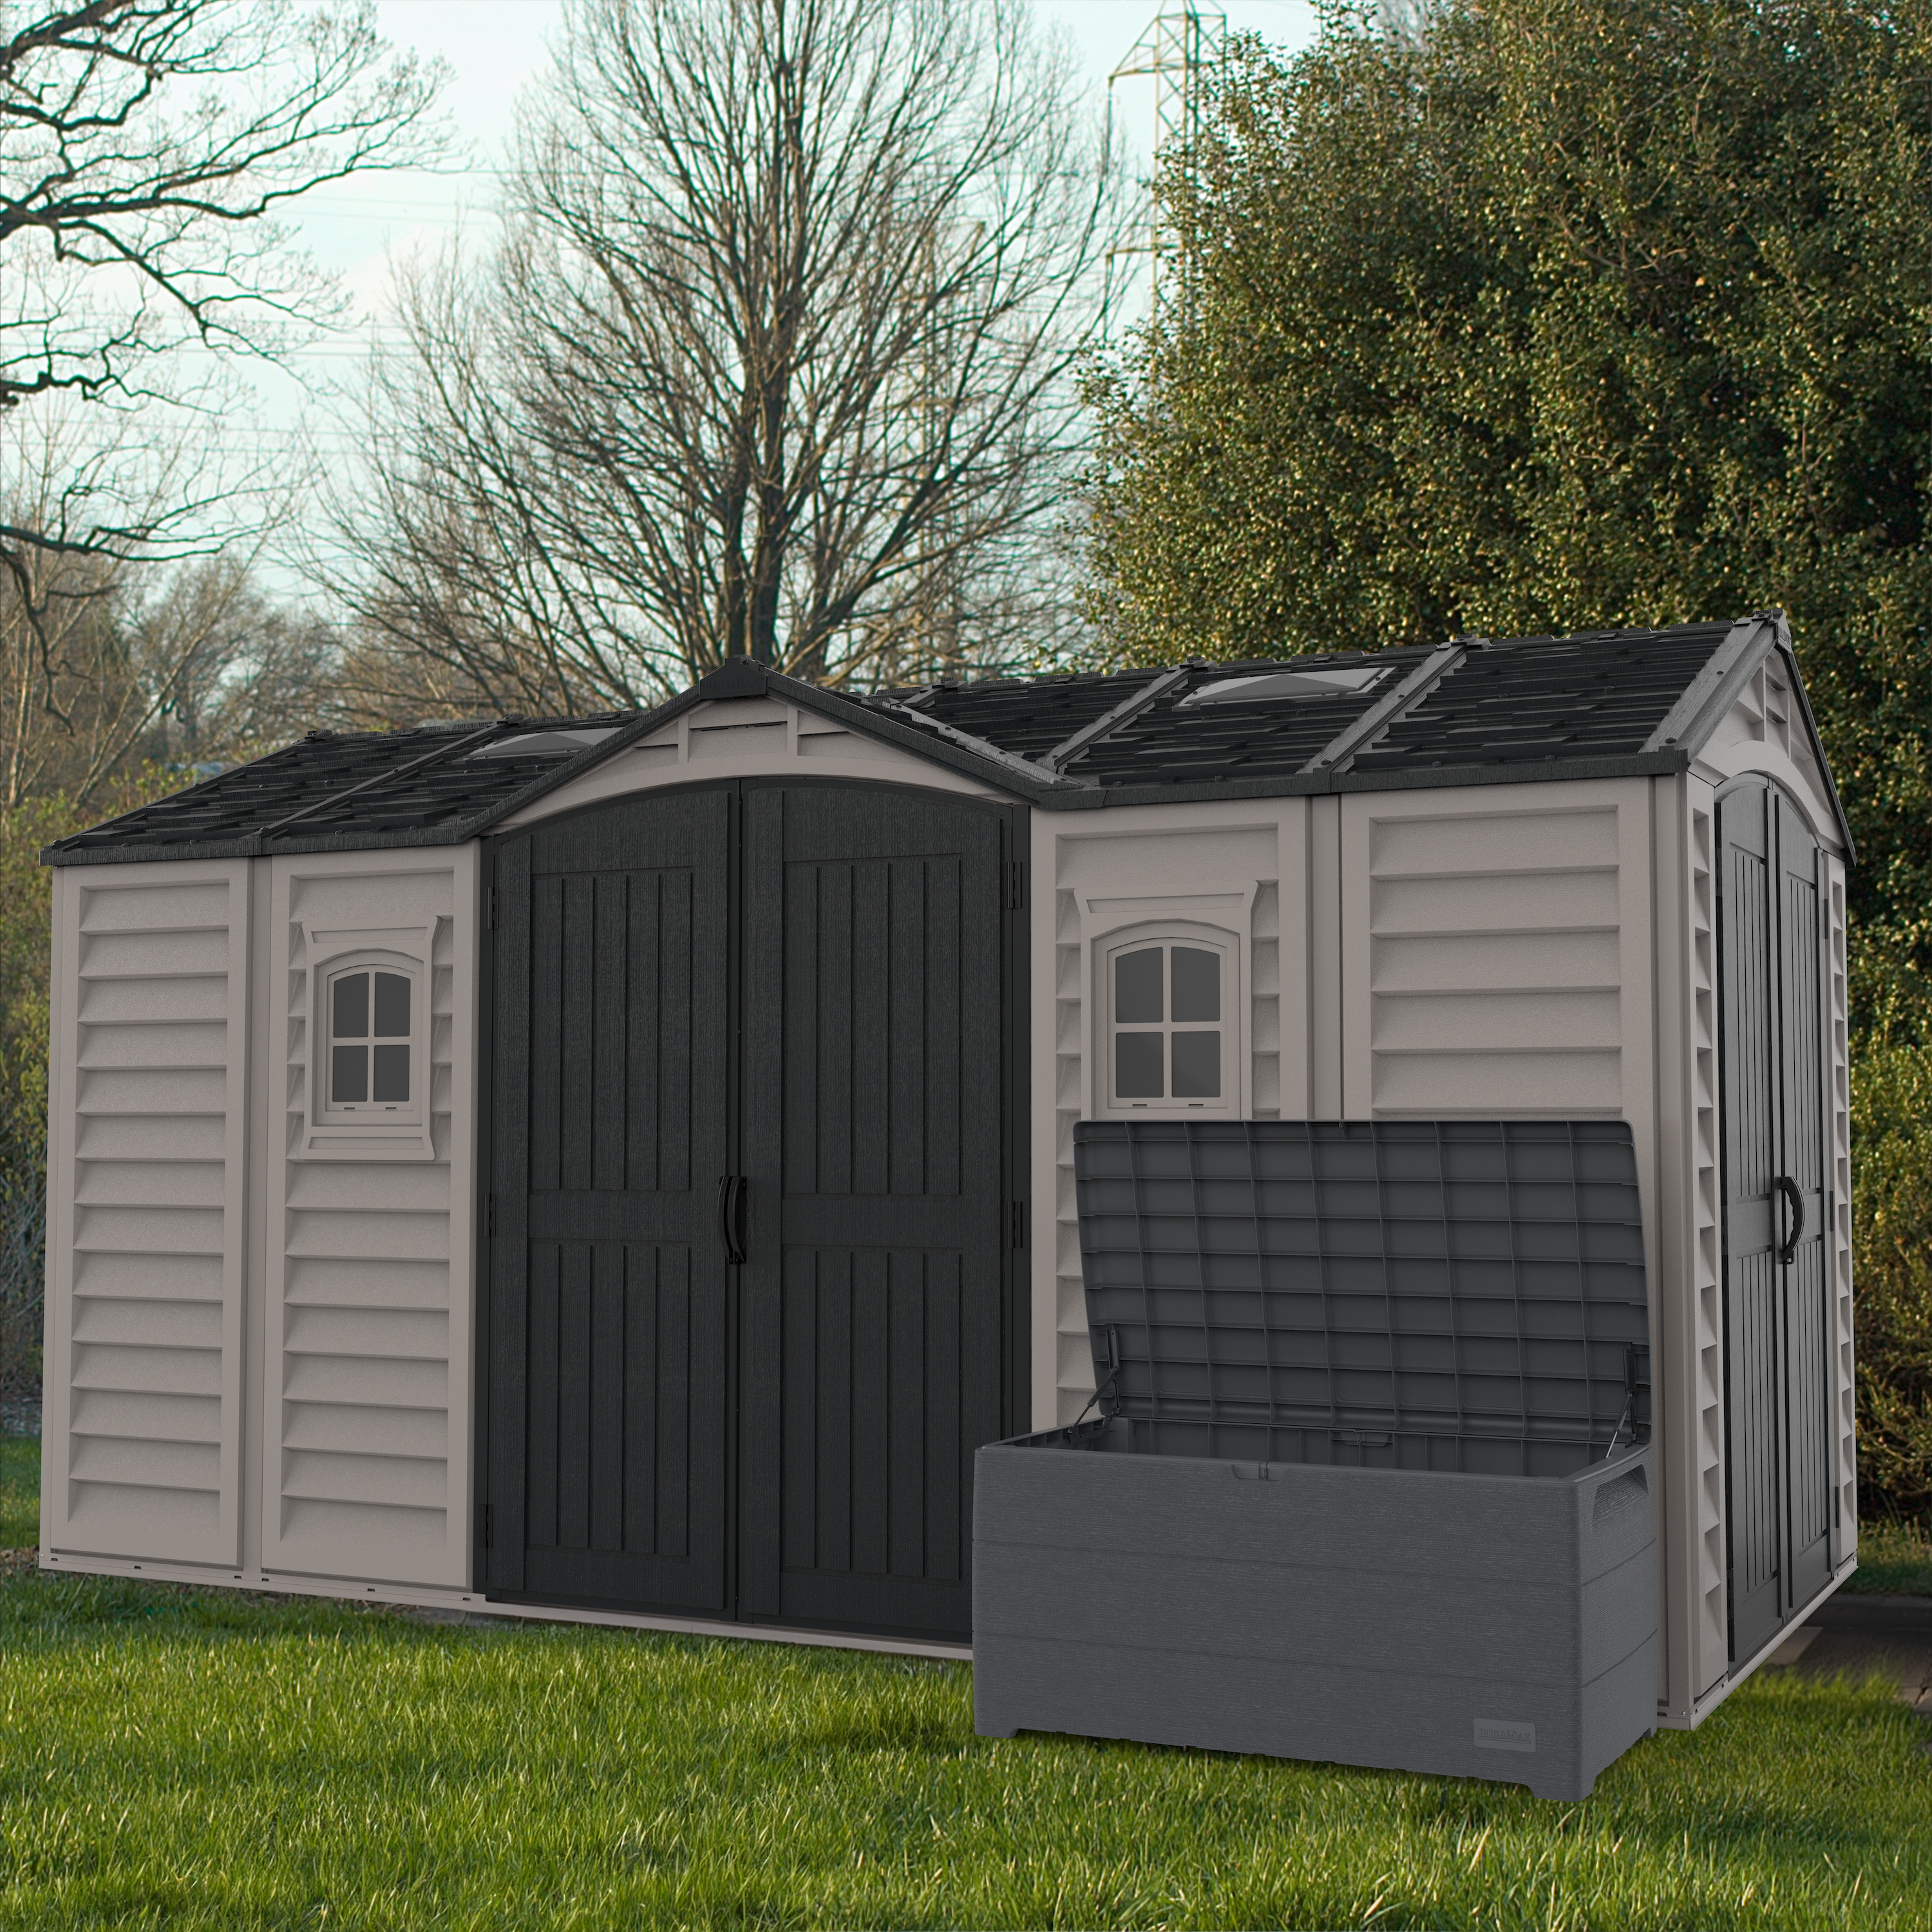 Duramax Vinyl Sheds Duramax 15 x 8 Apex Pro Vinyl Shed with Foundation, 2 Windows and 2 Doors